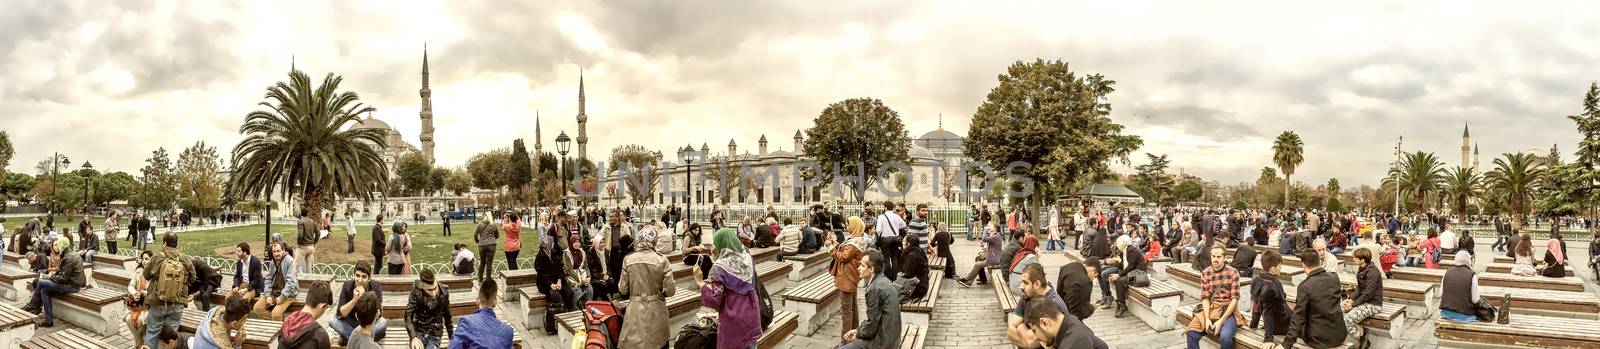 ISTANBUL - SEPTEMBER 20, 2014: Tourists take a break in Sultanahmet Square. More than 10 milltion people visit the city annually.